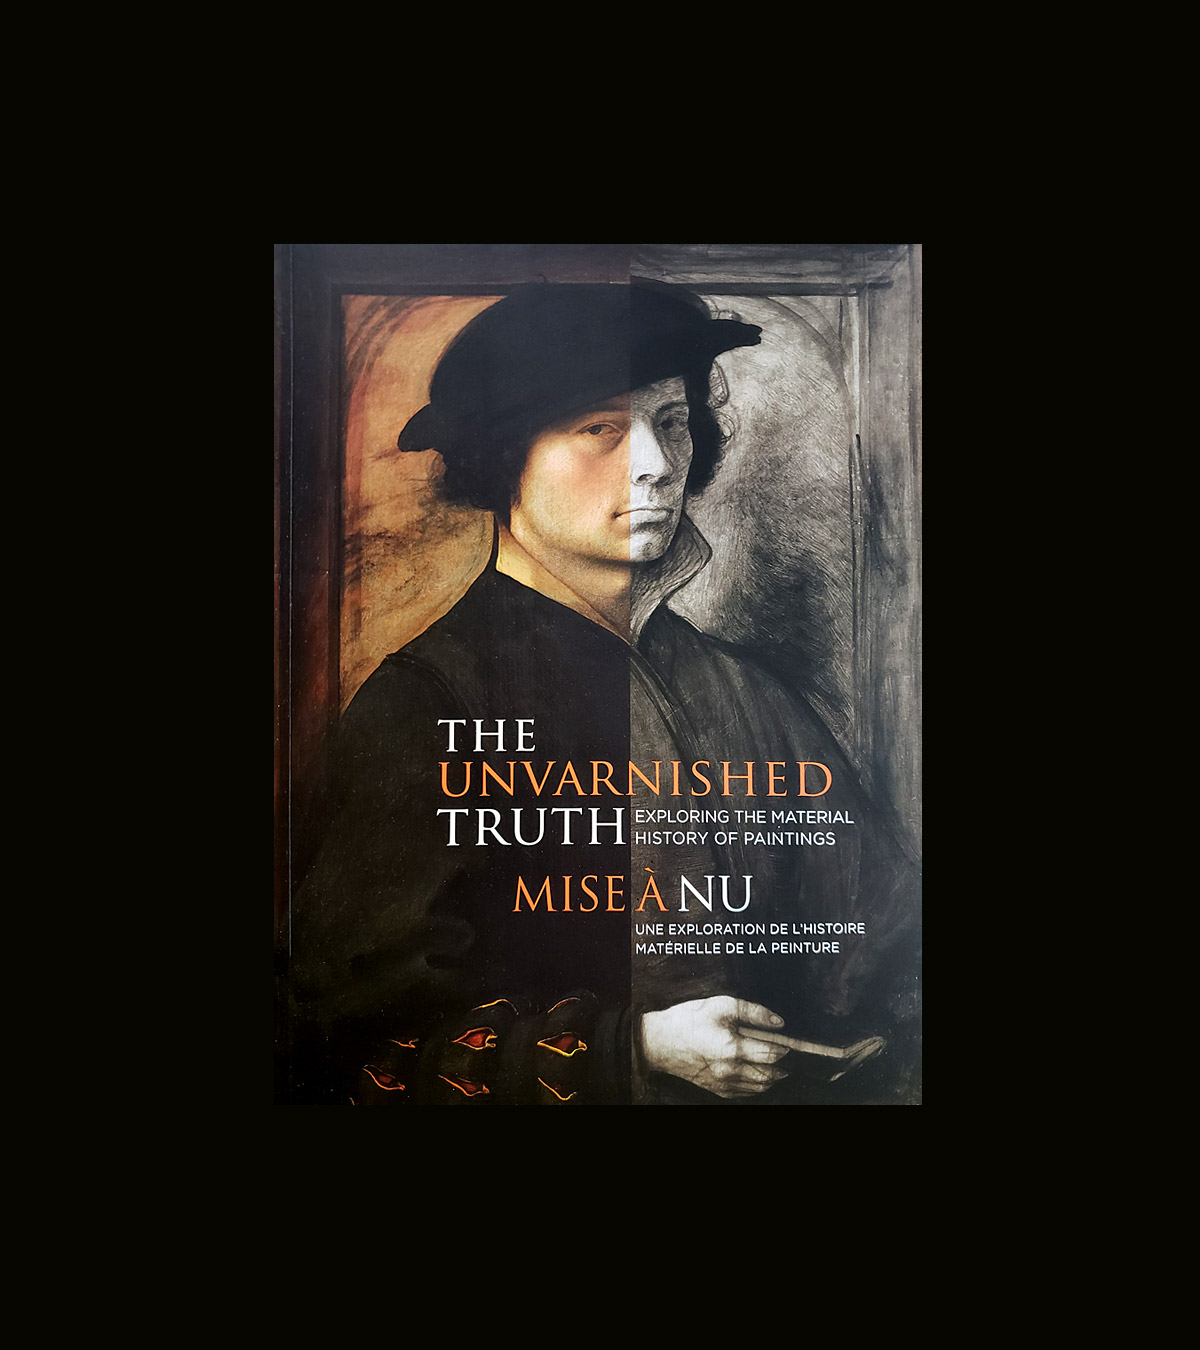 Book cover with portrait of man wearing a hat